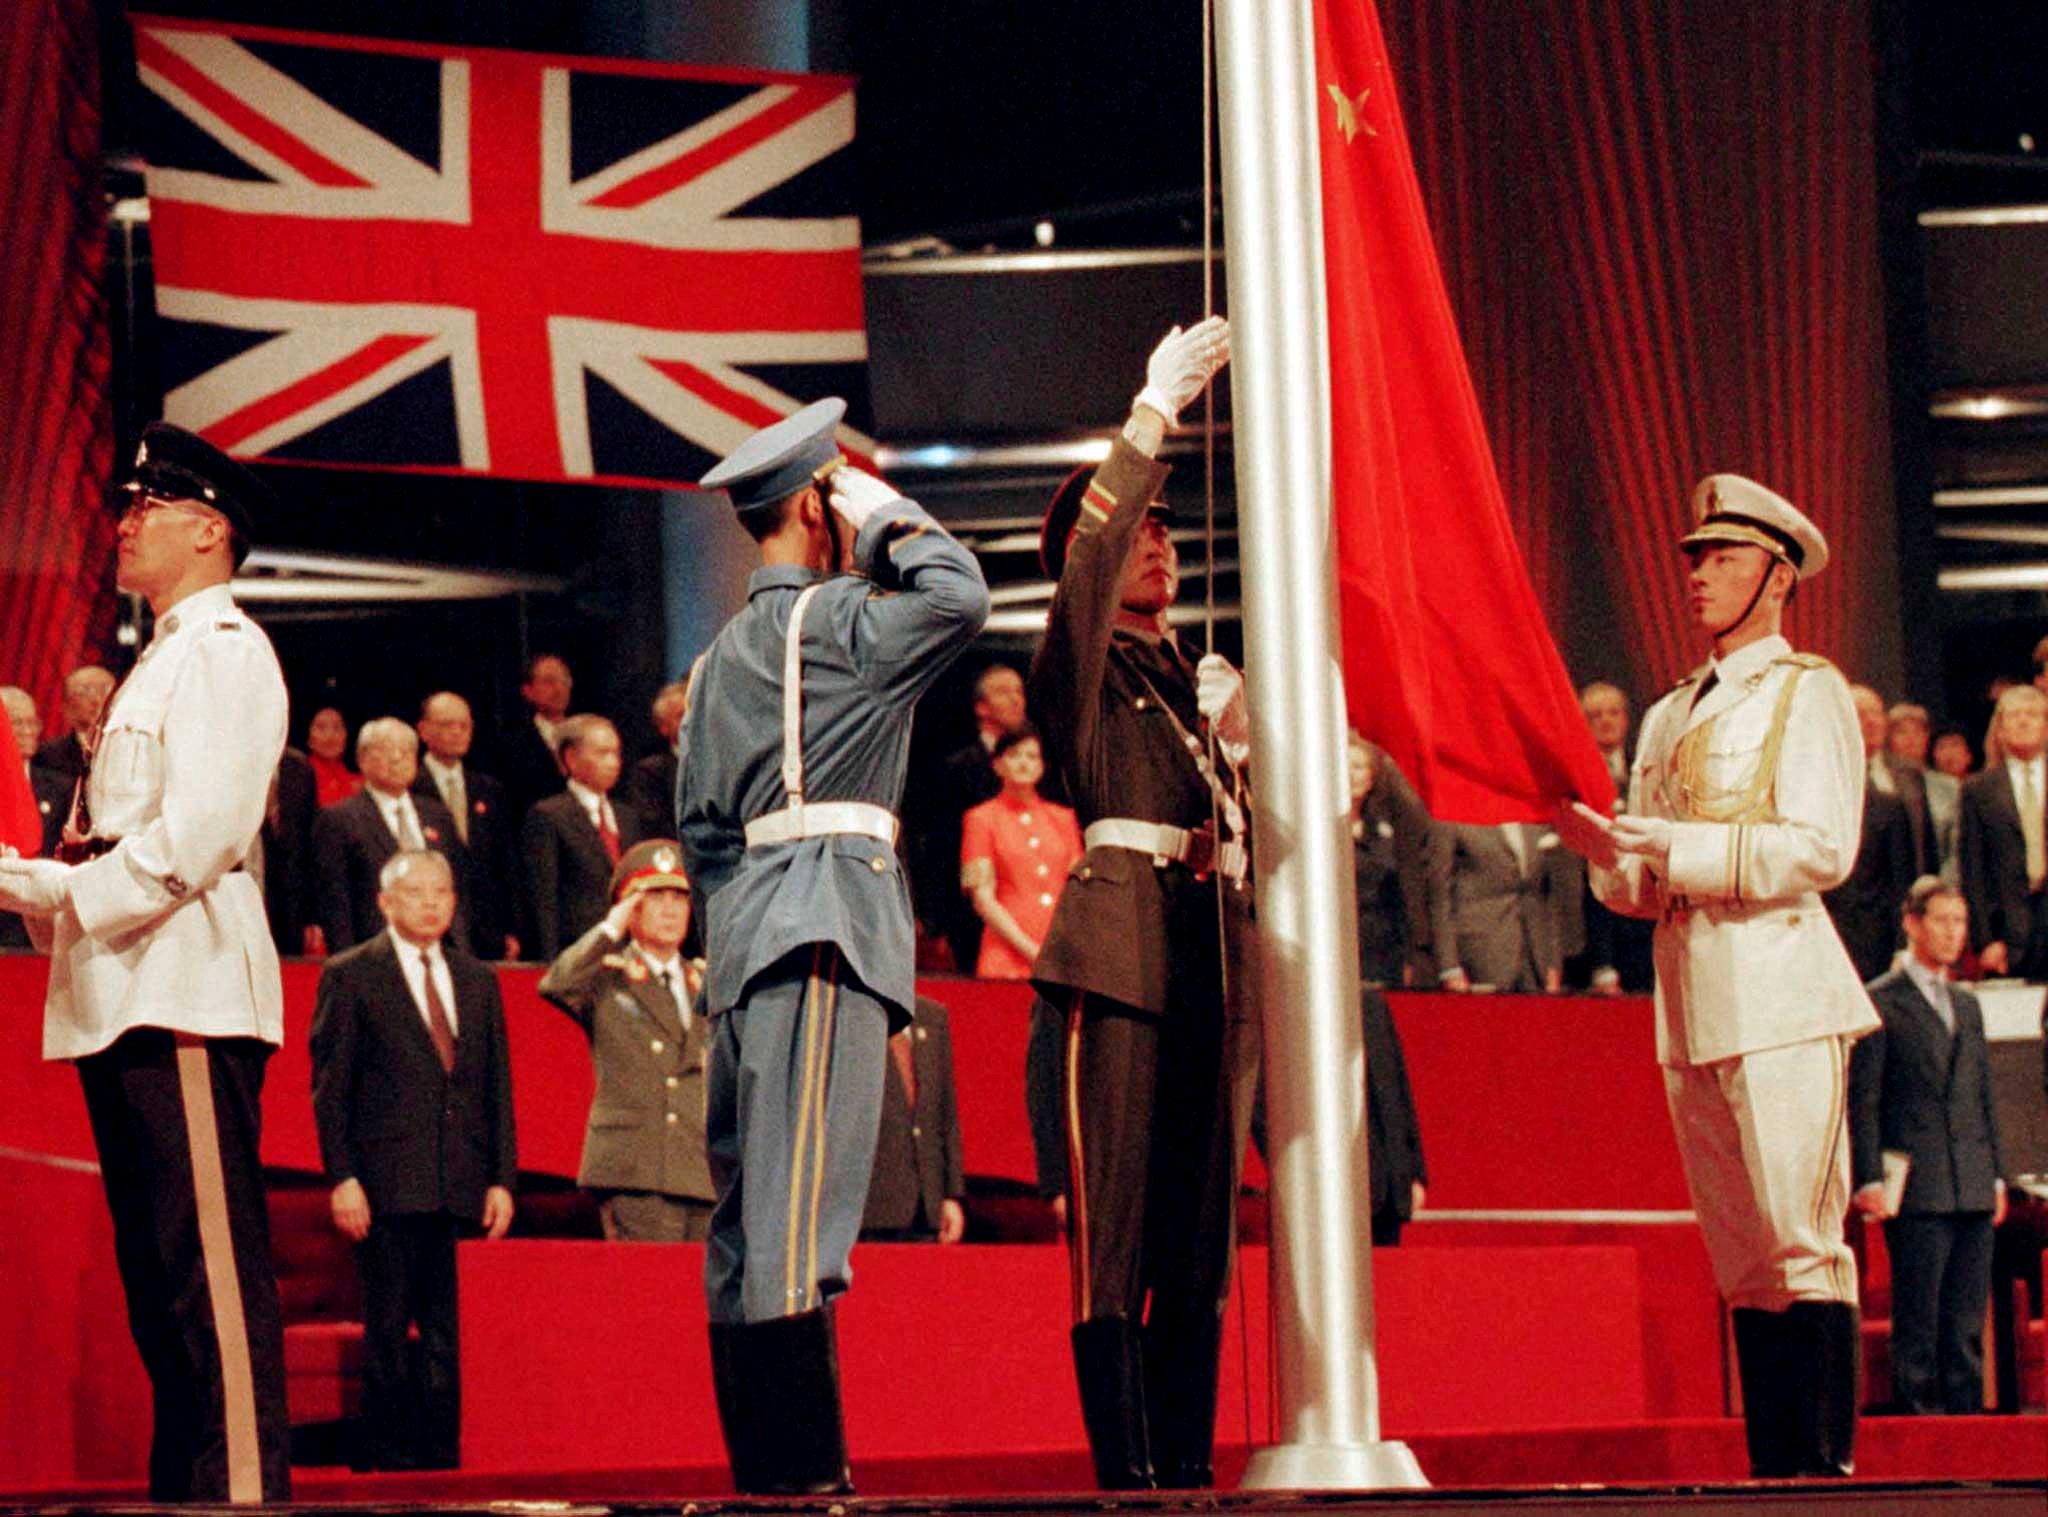 FILE PHOTO: People's Liberation Army soldiers raise the Chinese flag at the handover ceremony in which China regains sovereignty over Hong Kong after 156 years of British colonial rule in Hong Kong on July 1, 1997 (Reuters/Dylan Martinez)